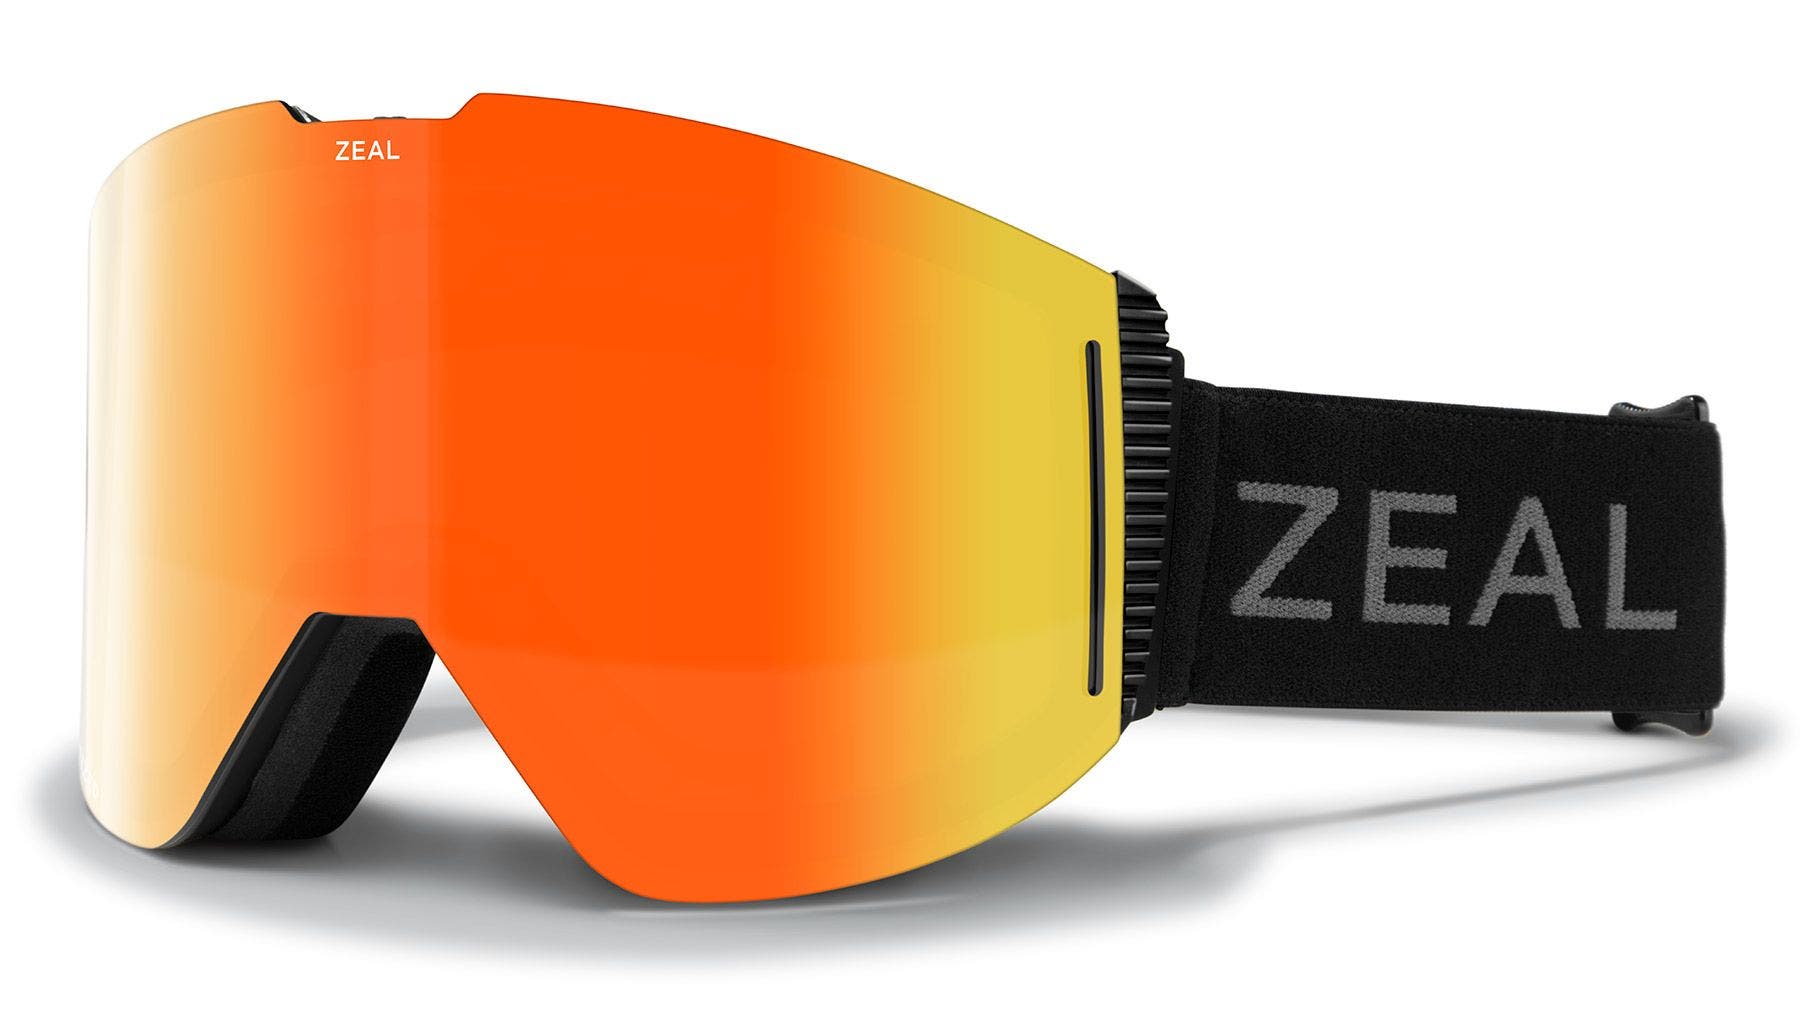 Zeal Lookout polarized ski goggles in black with orange shield lens.